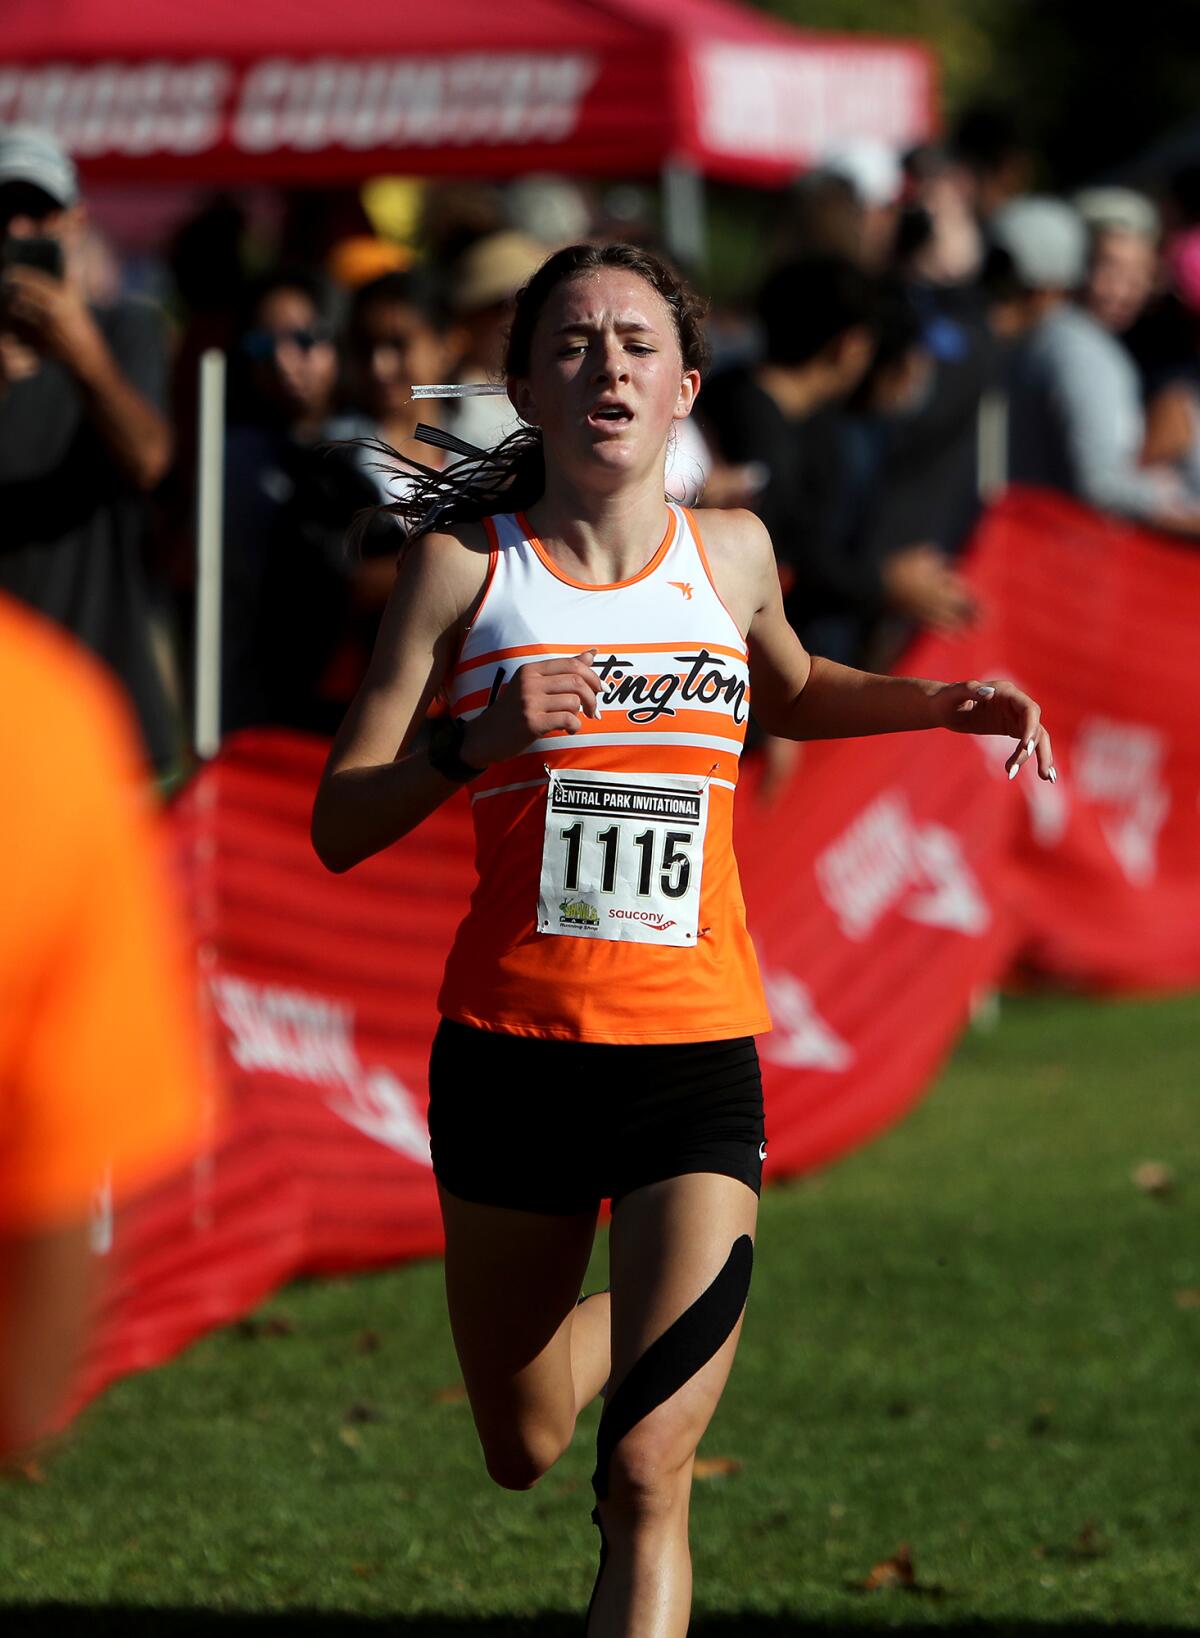 Huntington Beach's Makenzie McRae finishes first in the Central Park Invitational girls' Section 1 race.